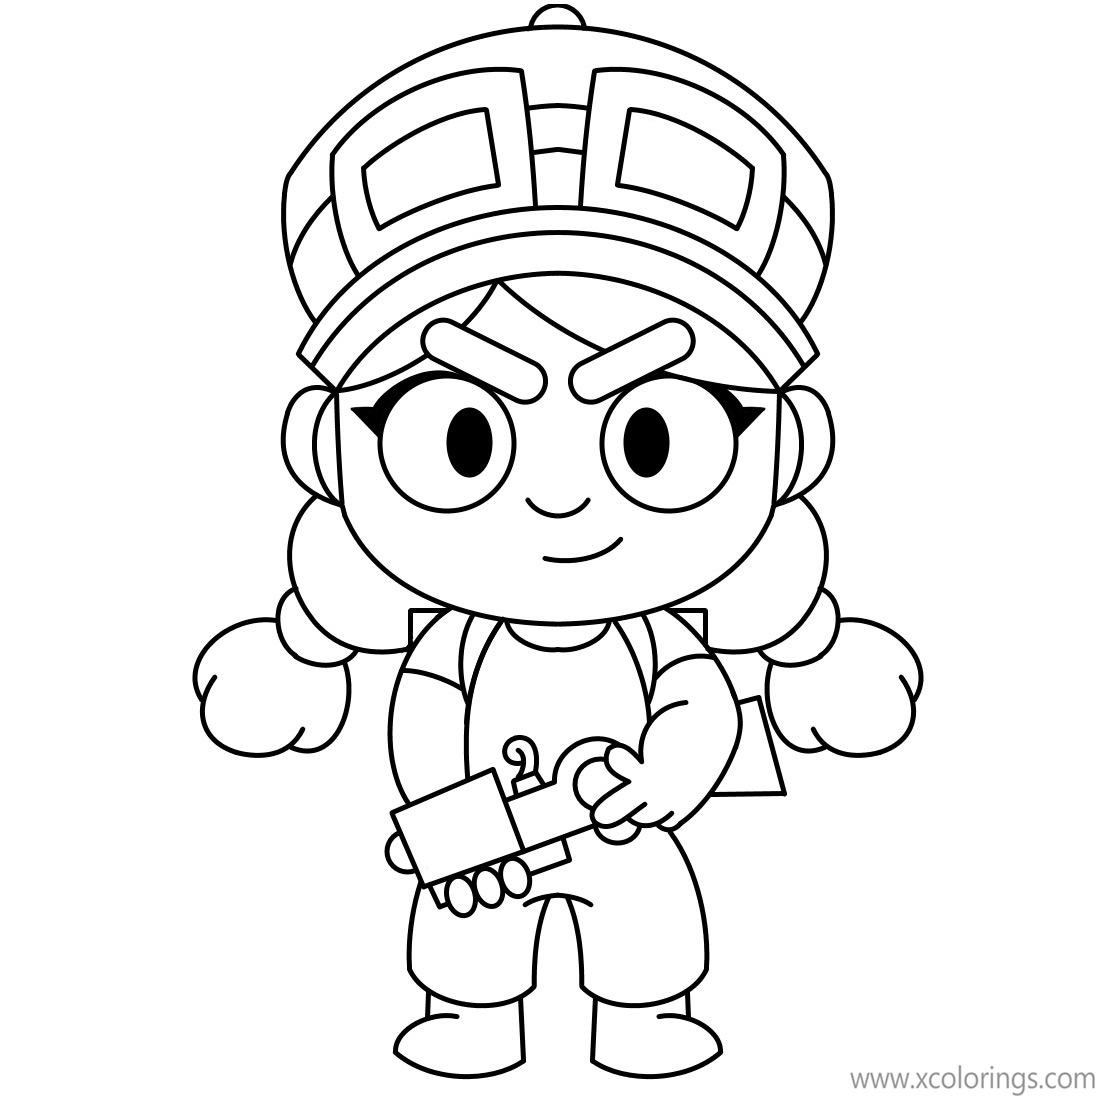 Free Chibi Shelly Brawl Stars Coloring Pages printable